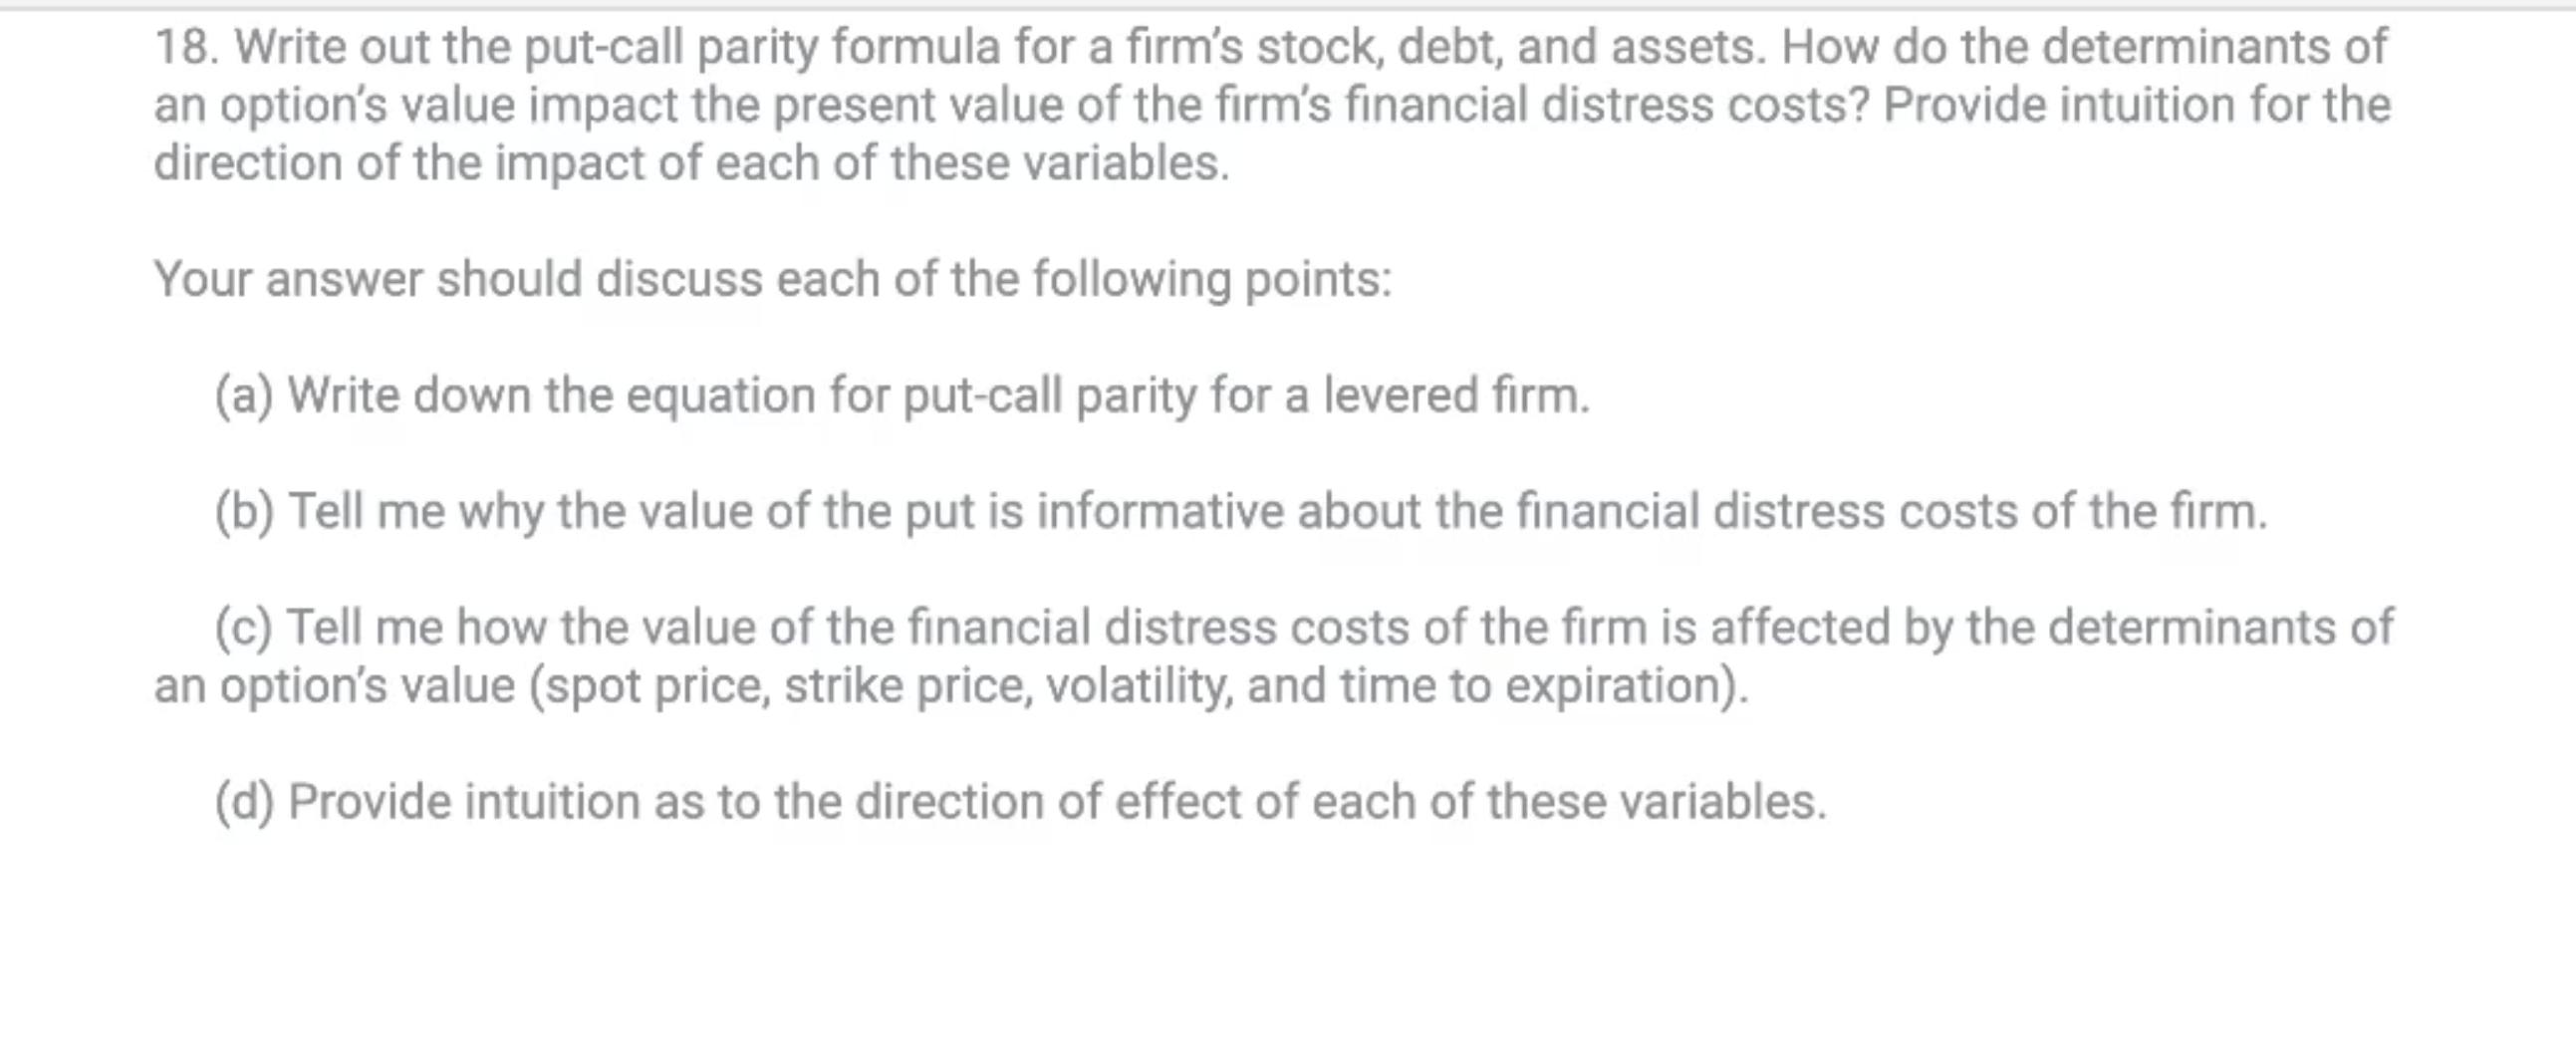 18. Write out the put-call parity formula for a firm's stock, debt, and assets. How do the determinants of an